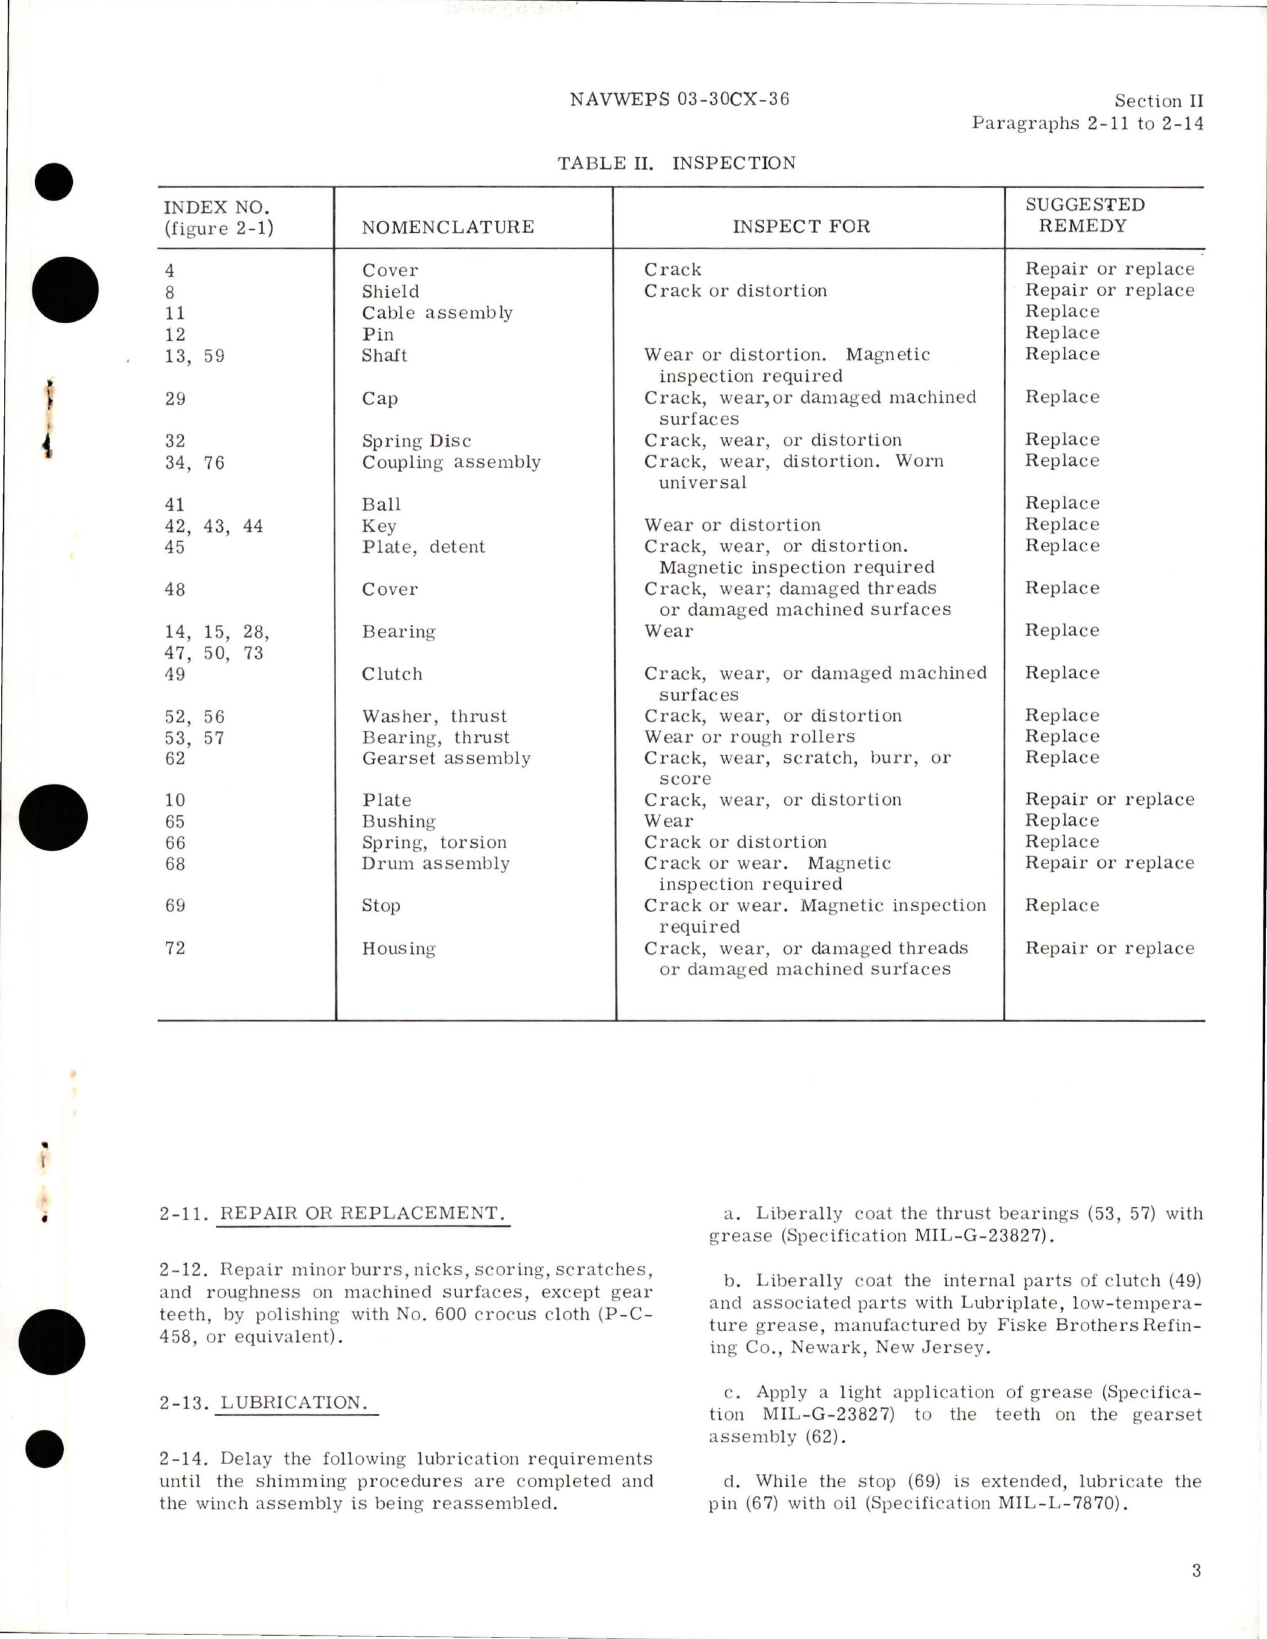 Sample page 5 from AirCorps Library document: Overhaul Instructions for No-Back Radar Hoisting Winch Assembly - Part 279-529001